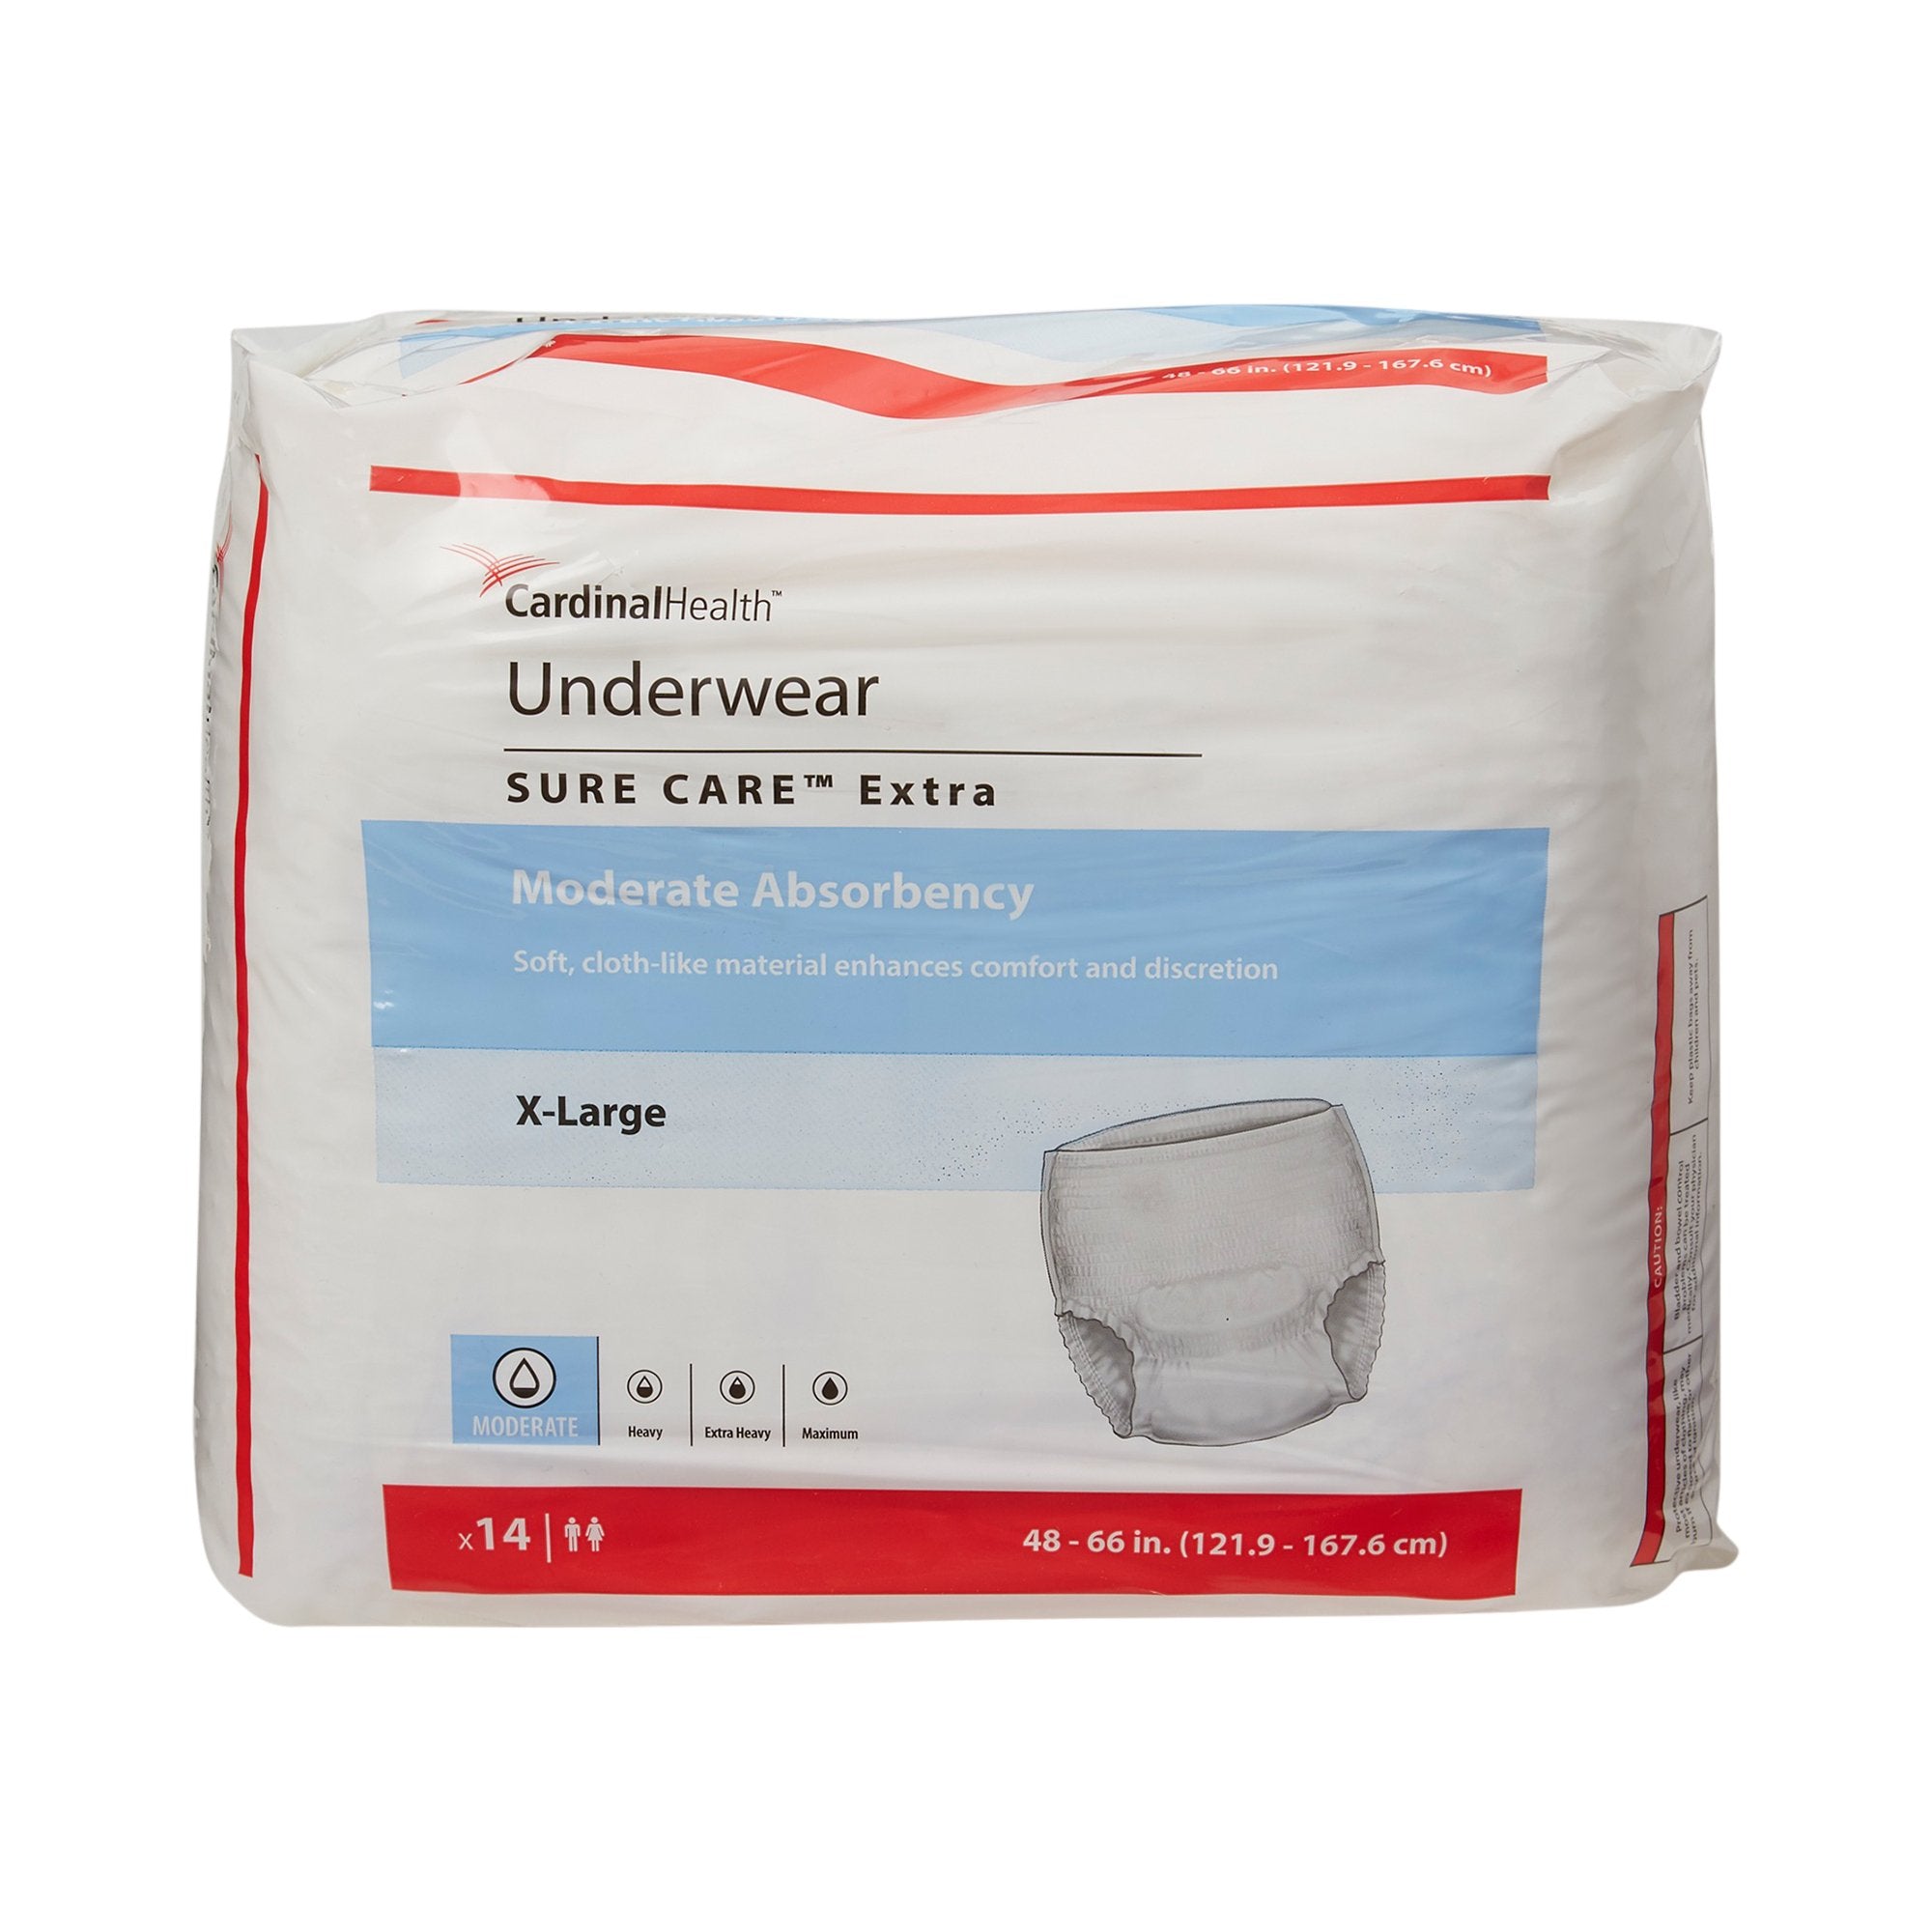 Unisex Adult Absorbent Underwear Simplicity Pull On with Tear Away Seams X-Large Disposable Moderate Absorbency